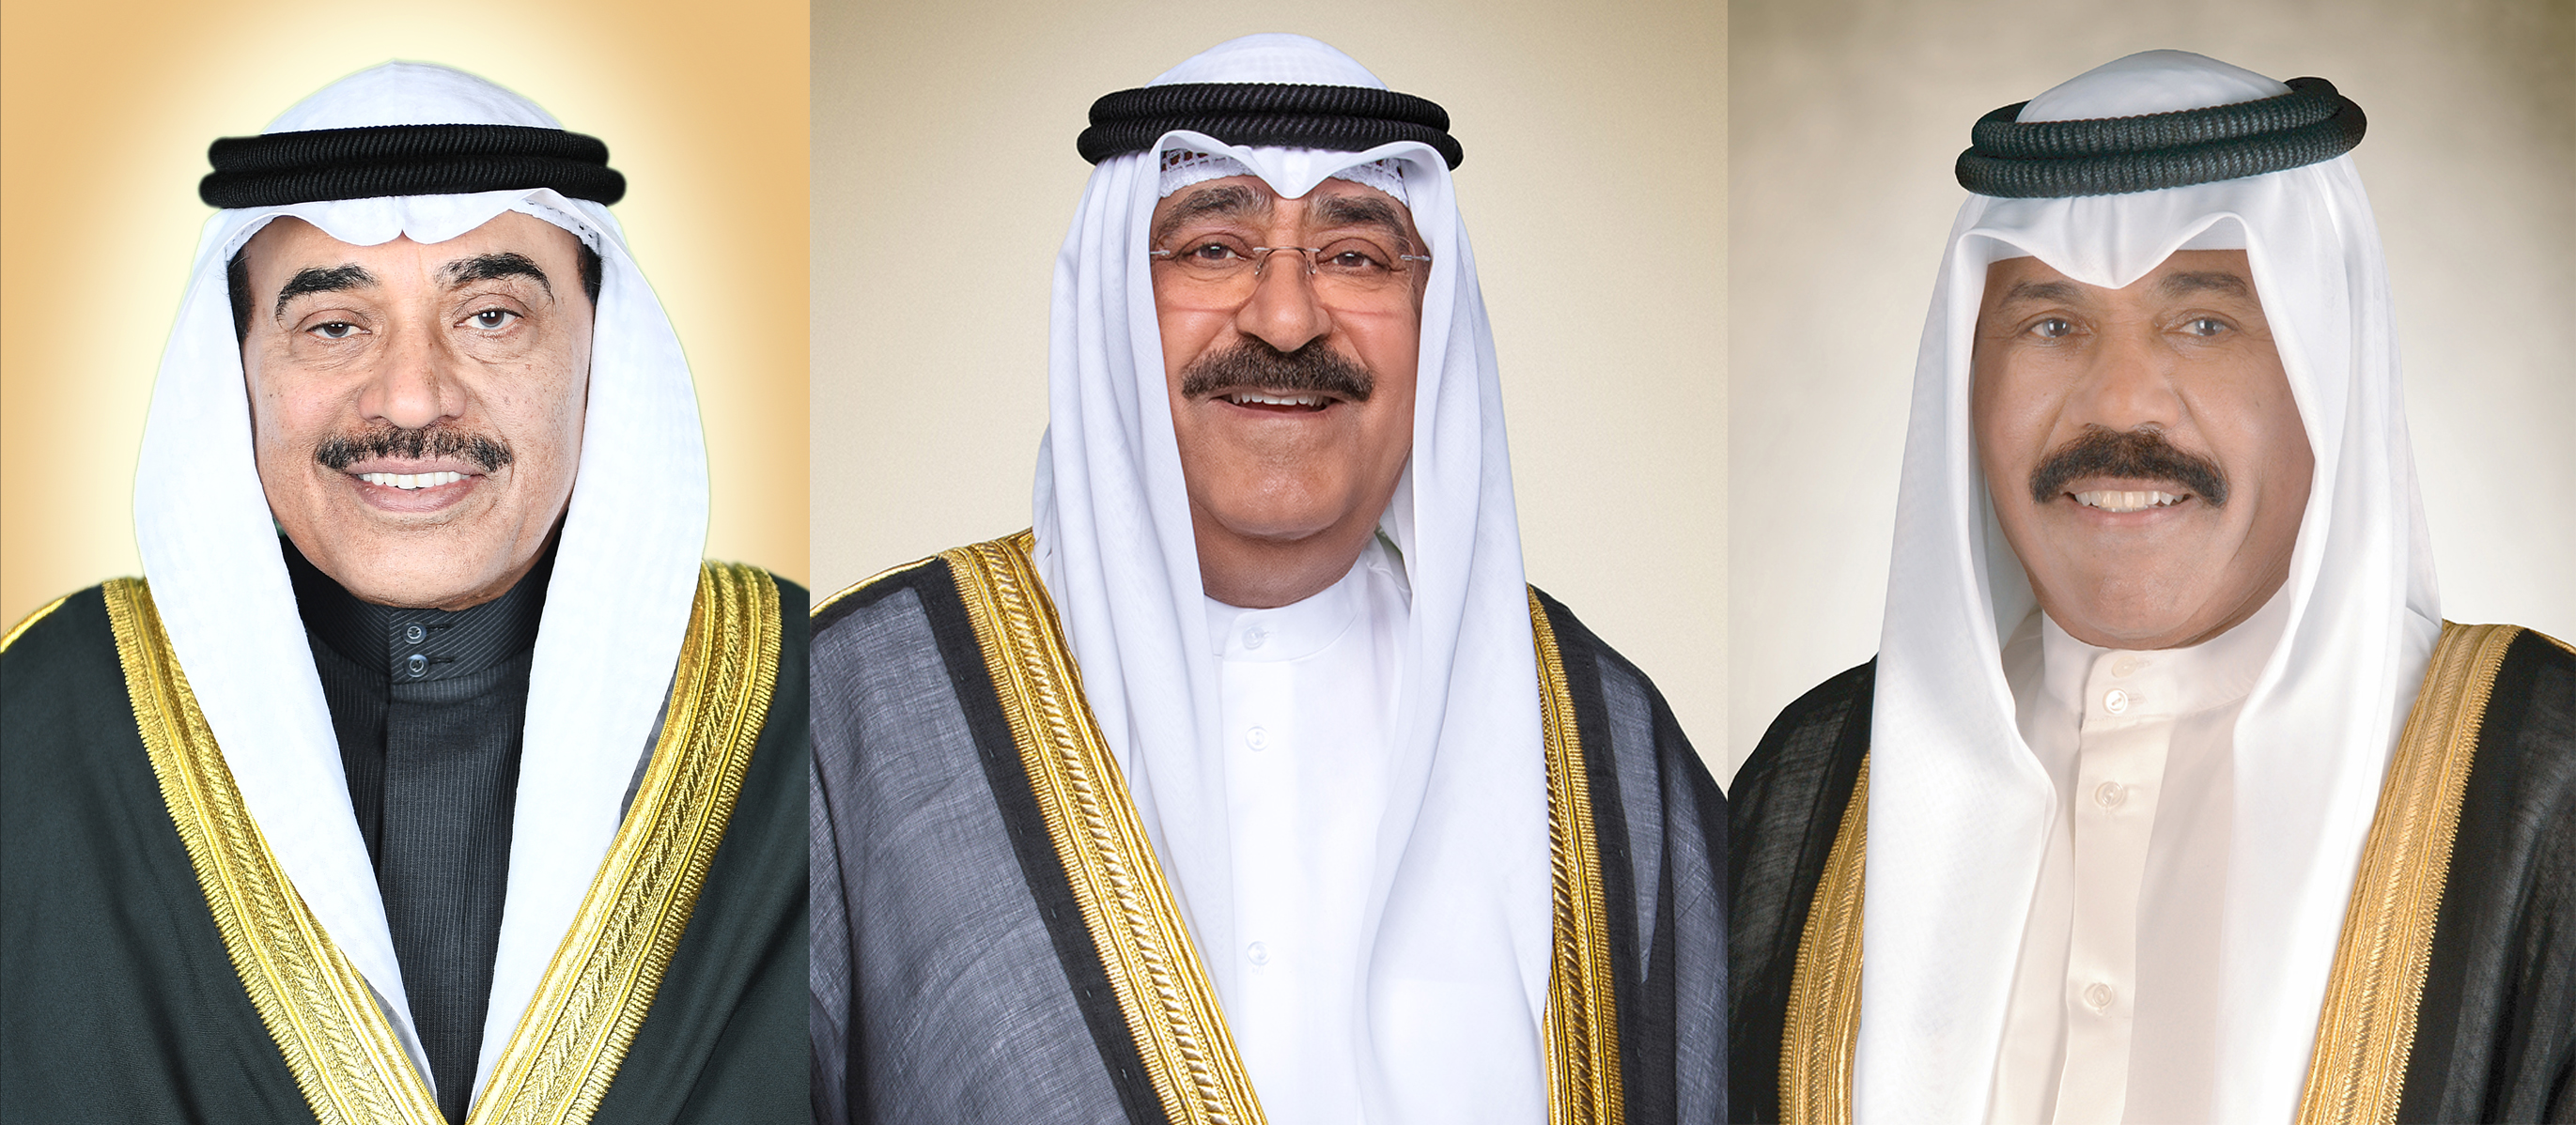 His Highness The Amir, His Highness The Crown Prince, and His Highness The Prime Minister